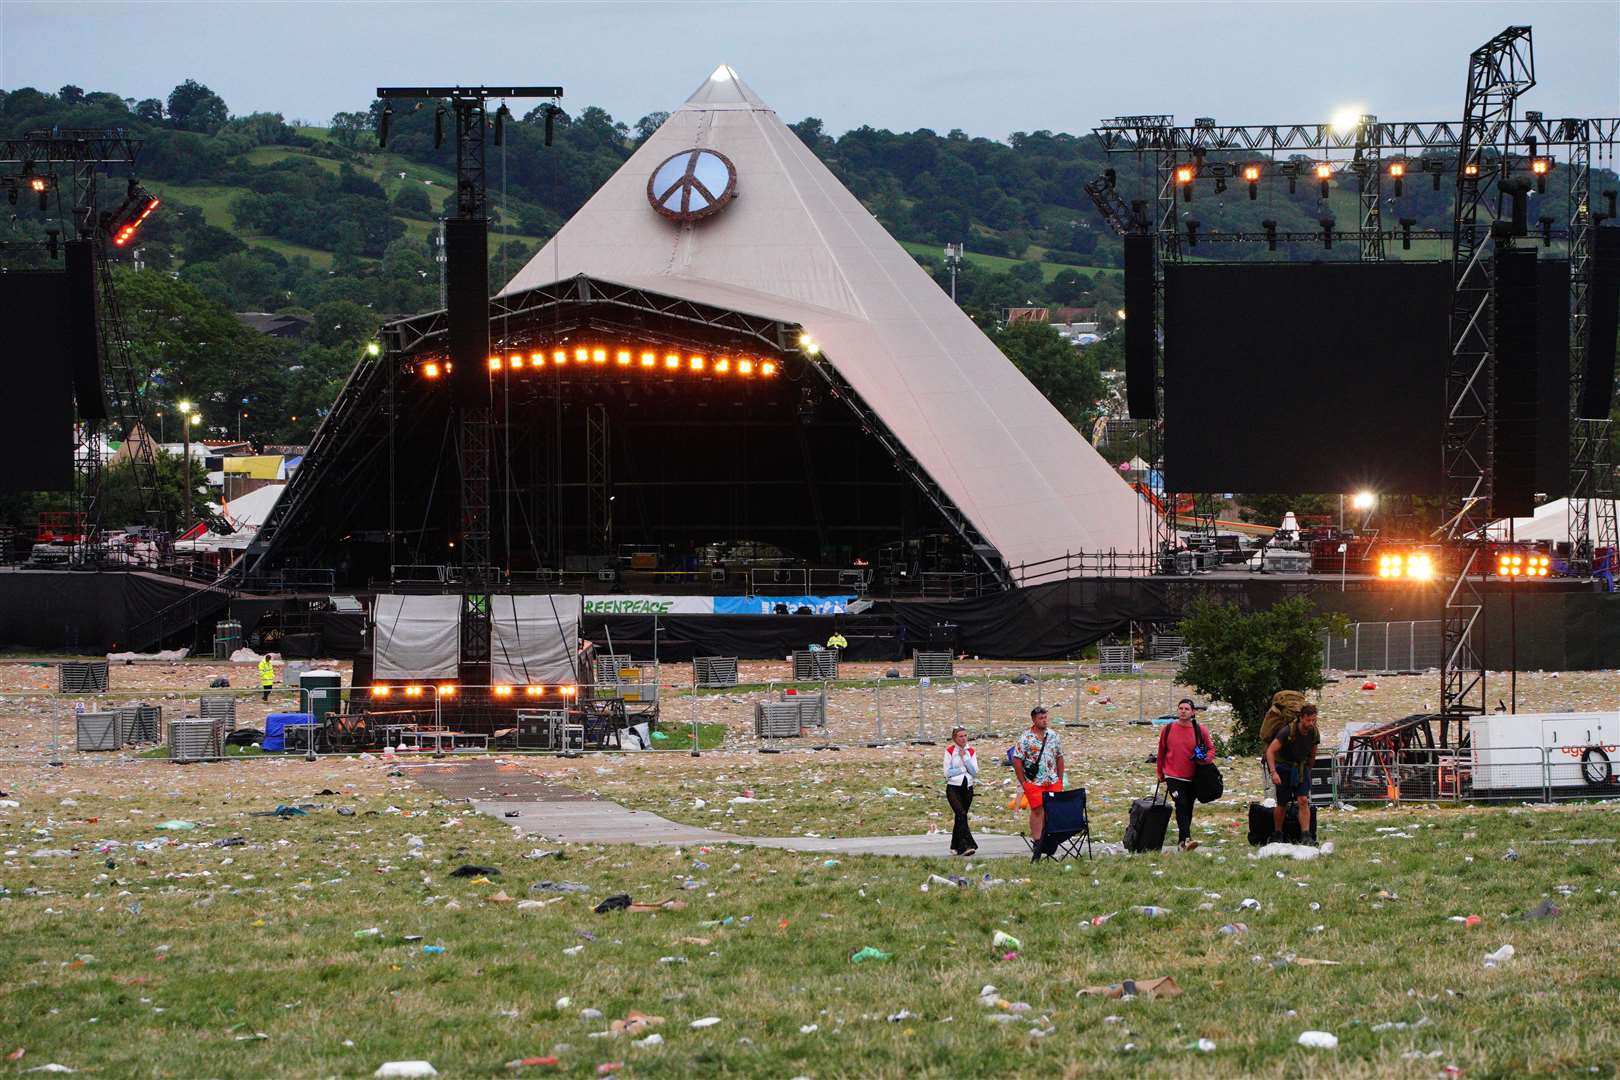 The festival site is largely empty after several days of entertainment (Ben Birchall/PA)